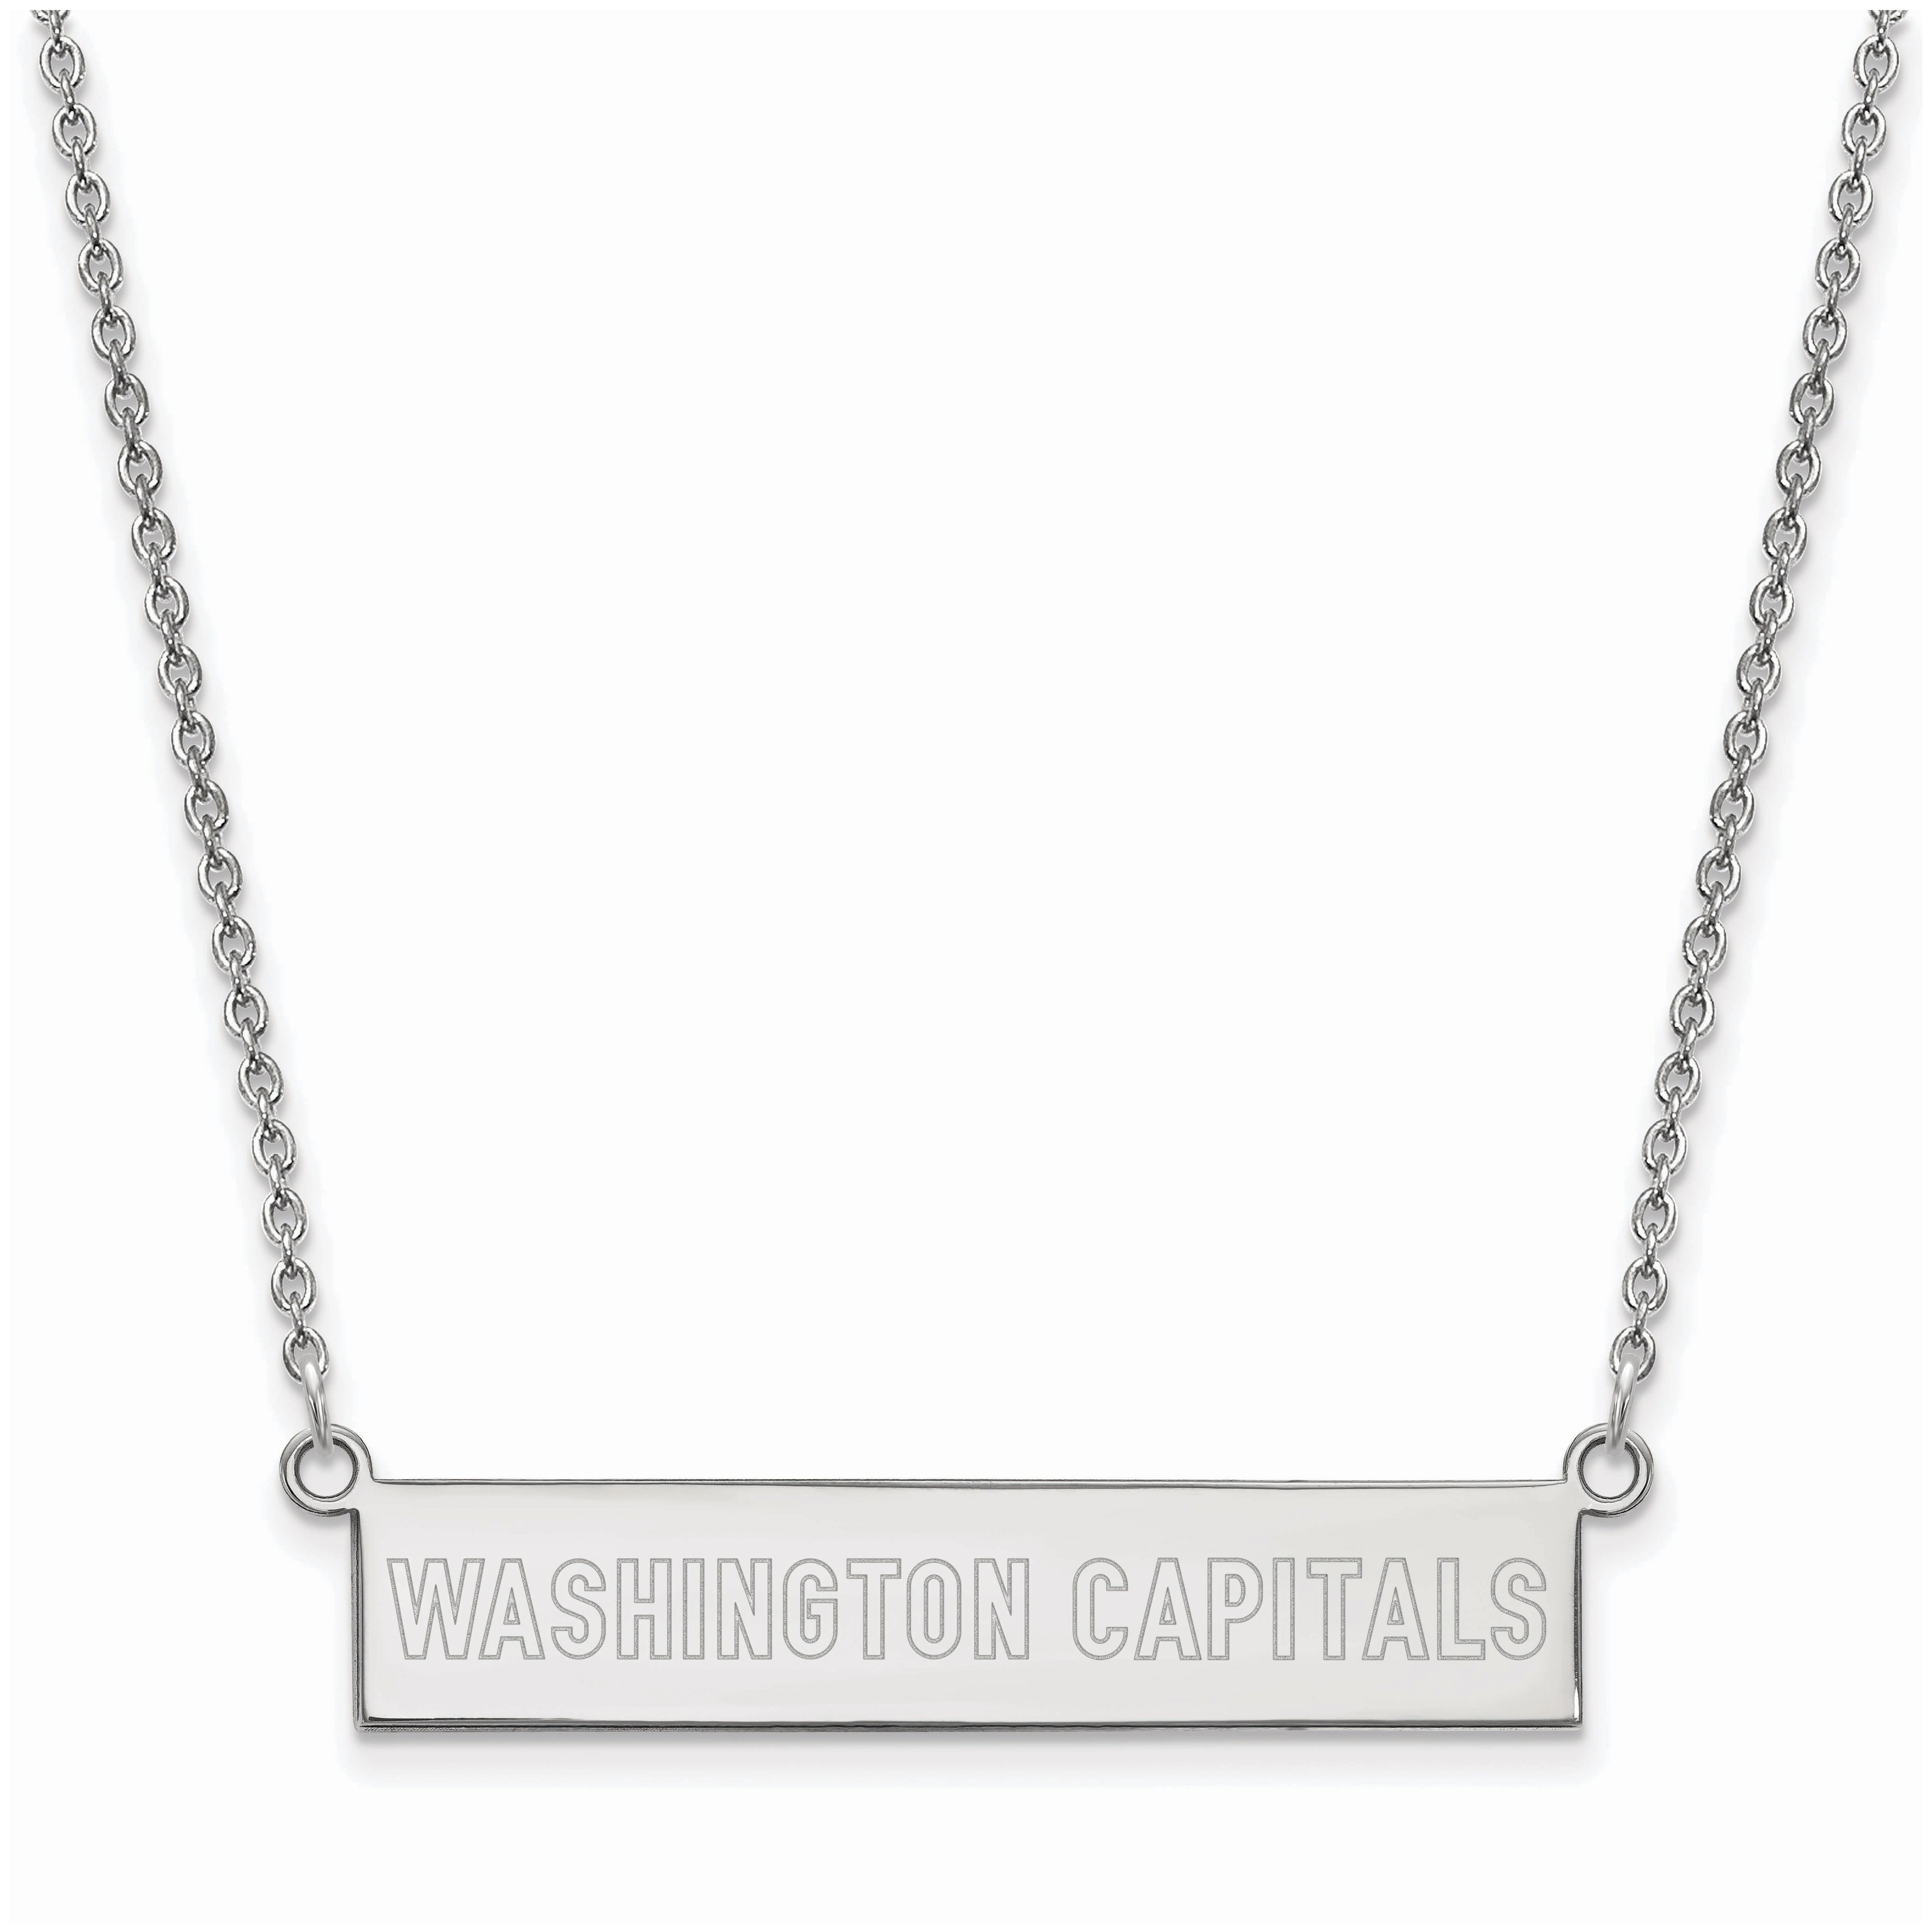 Solid 925 Sterling Silver Official Washington Capitals Small Bar Pendant Necklace Charm Chain